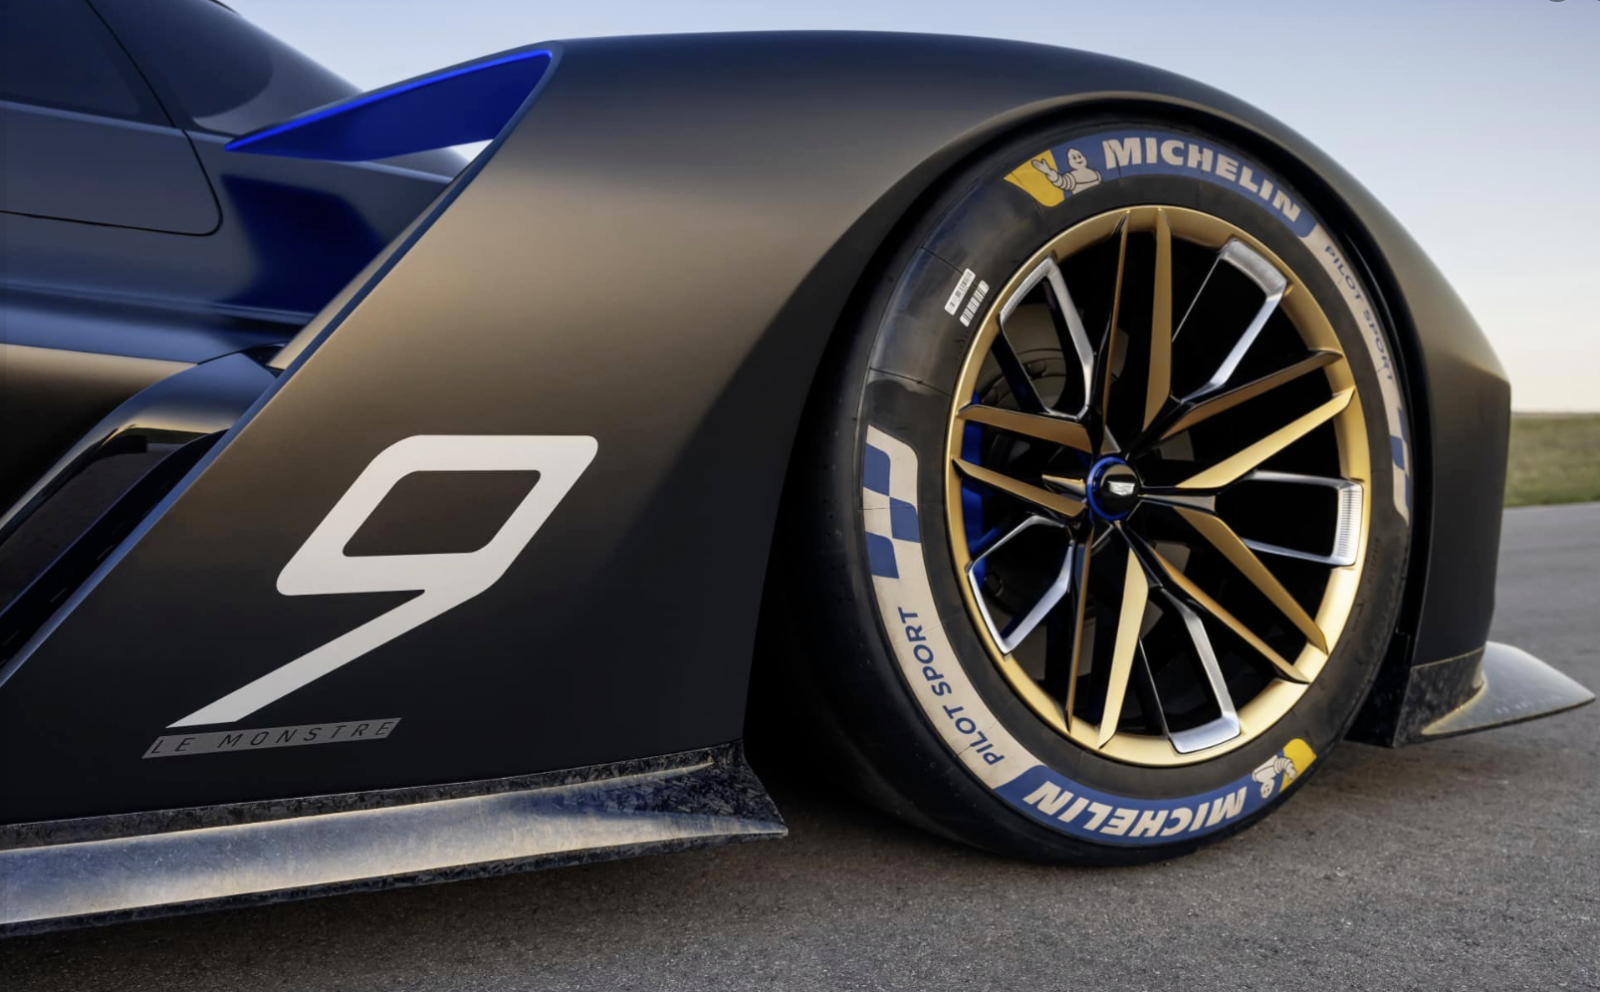 Cadillac's New Project GTP Hypercar Look Like the Batmobile of